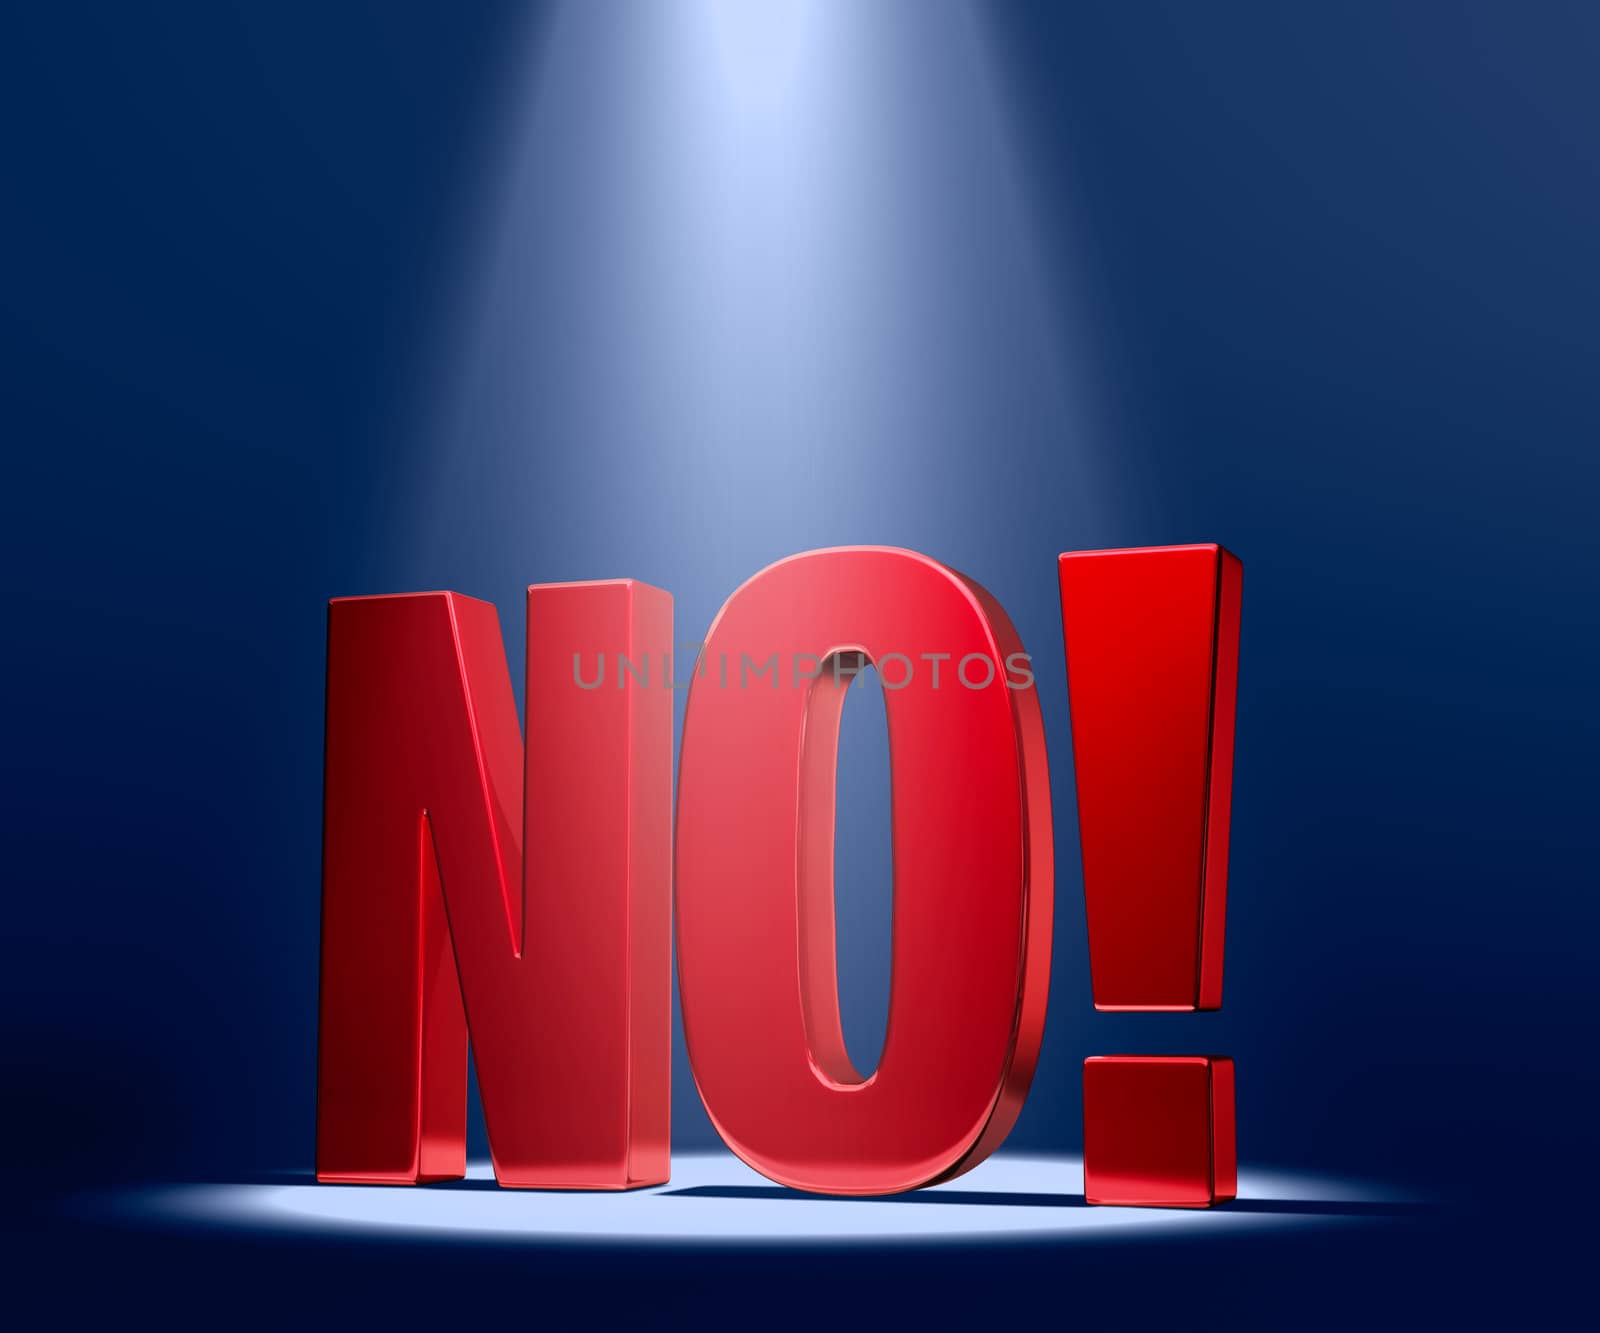 Shiny red  "NO!" on a dark blue background highlighted by a bright spotlight directly overhead.